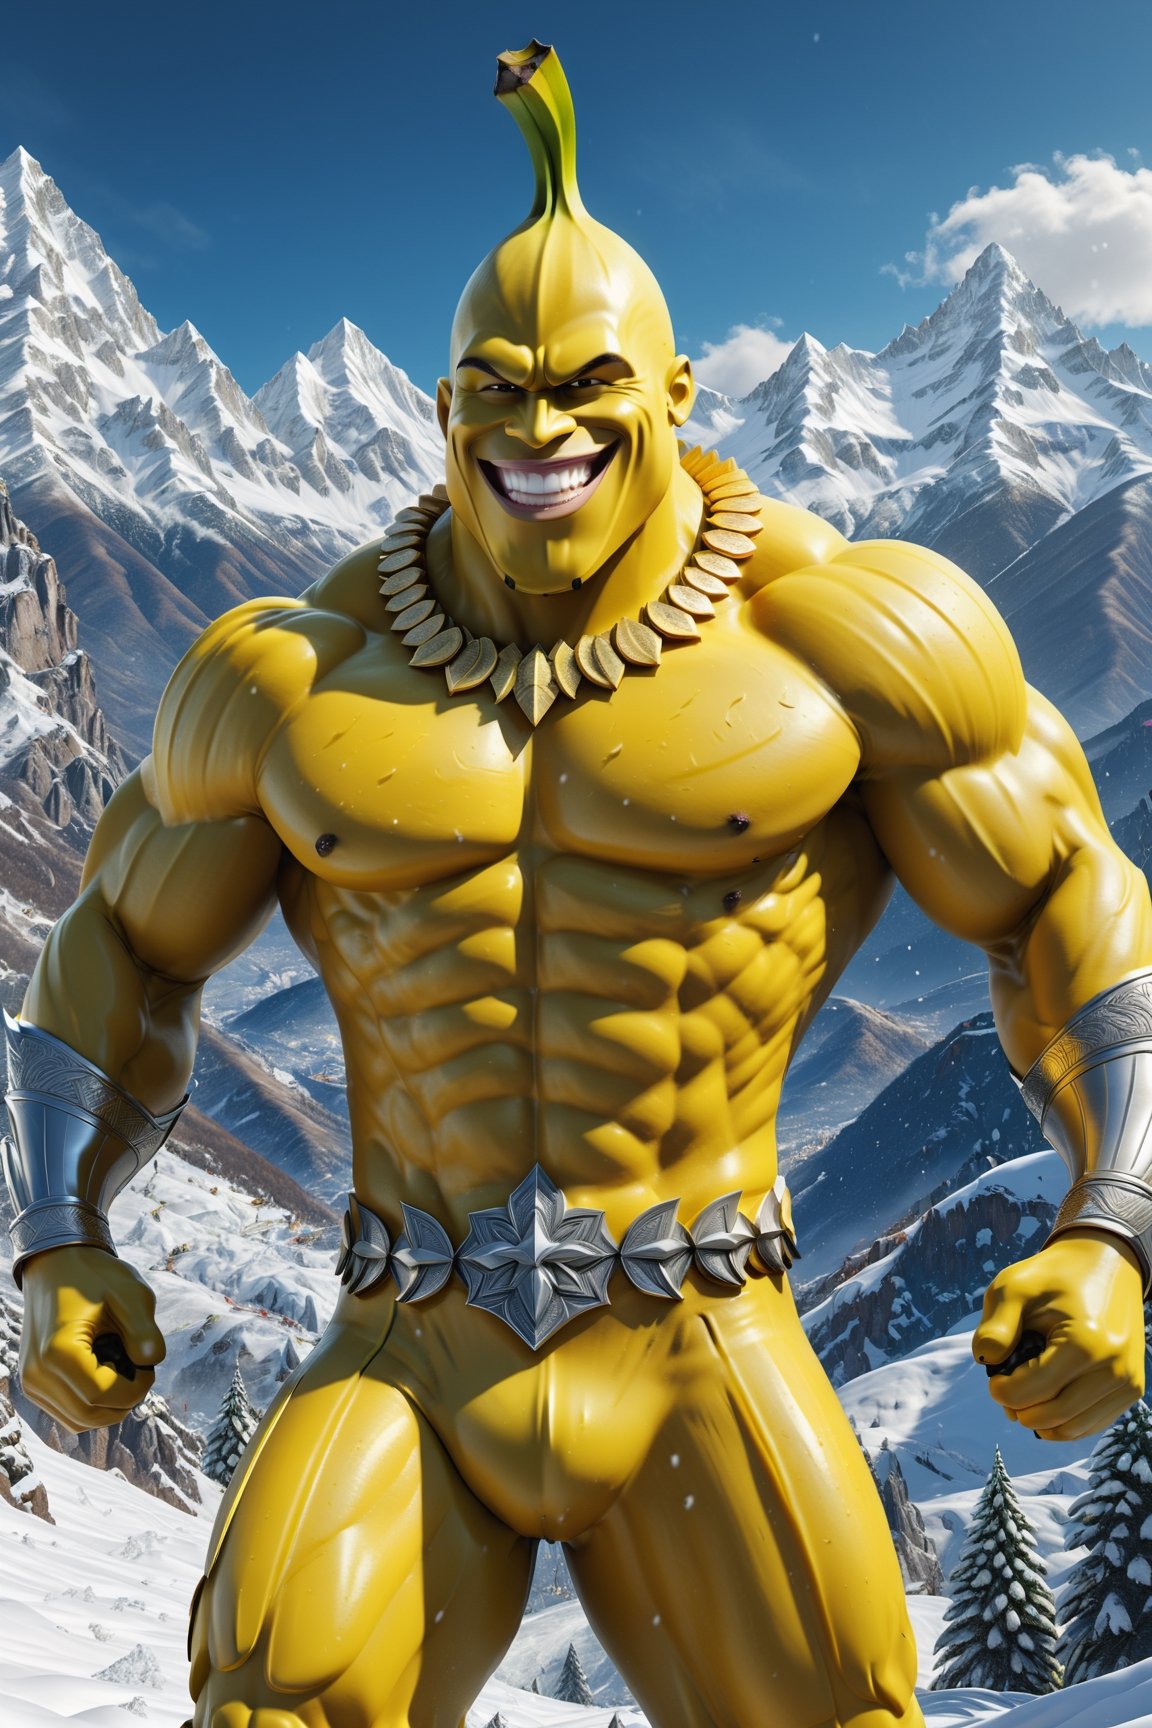 High definition photorealistic render of an incredible and mysterious character of a banana warrior, with body men muscles and a big smile, in a mountains snow, with luxurious details in marble and metal and details in parametric architecture and art deco, the fruit It must be the head of the character